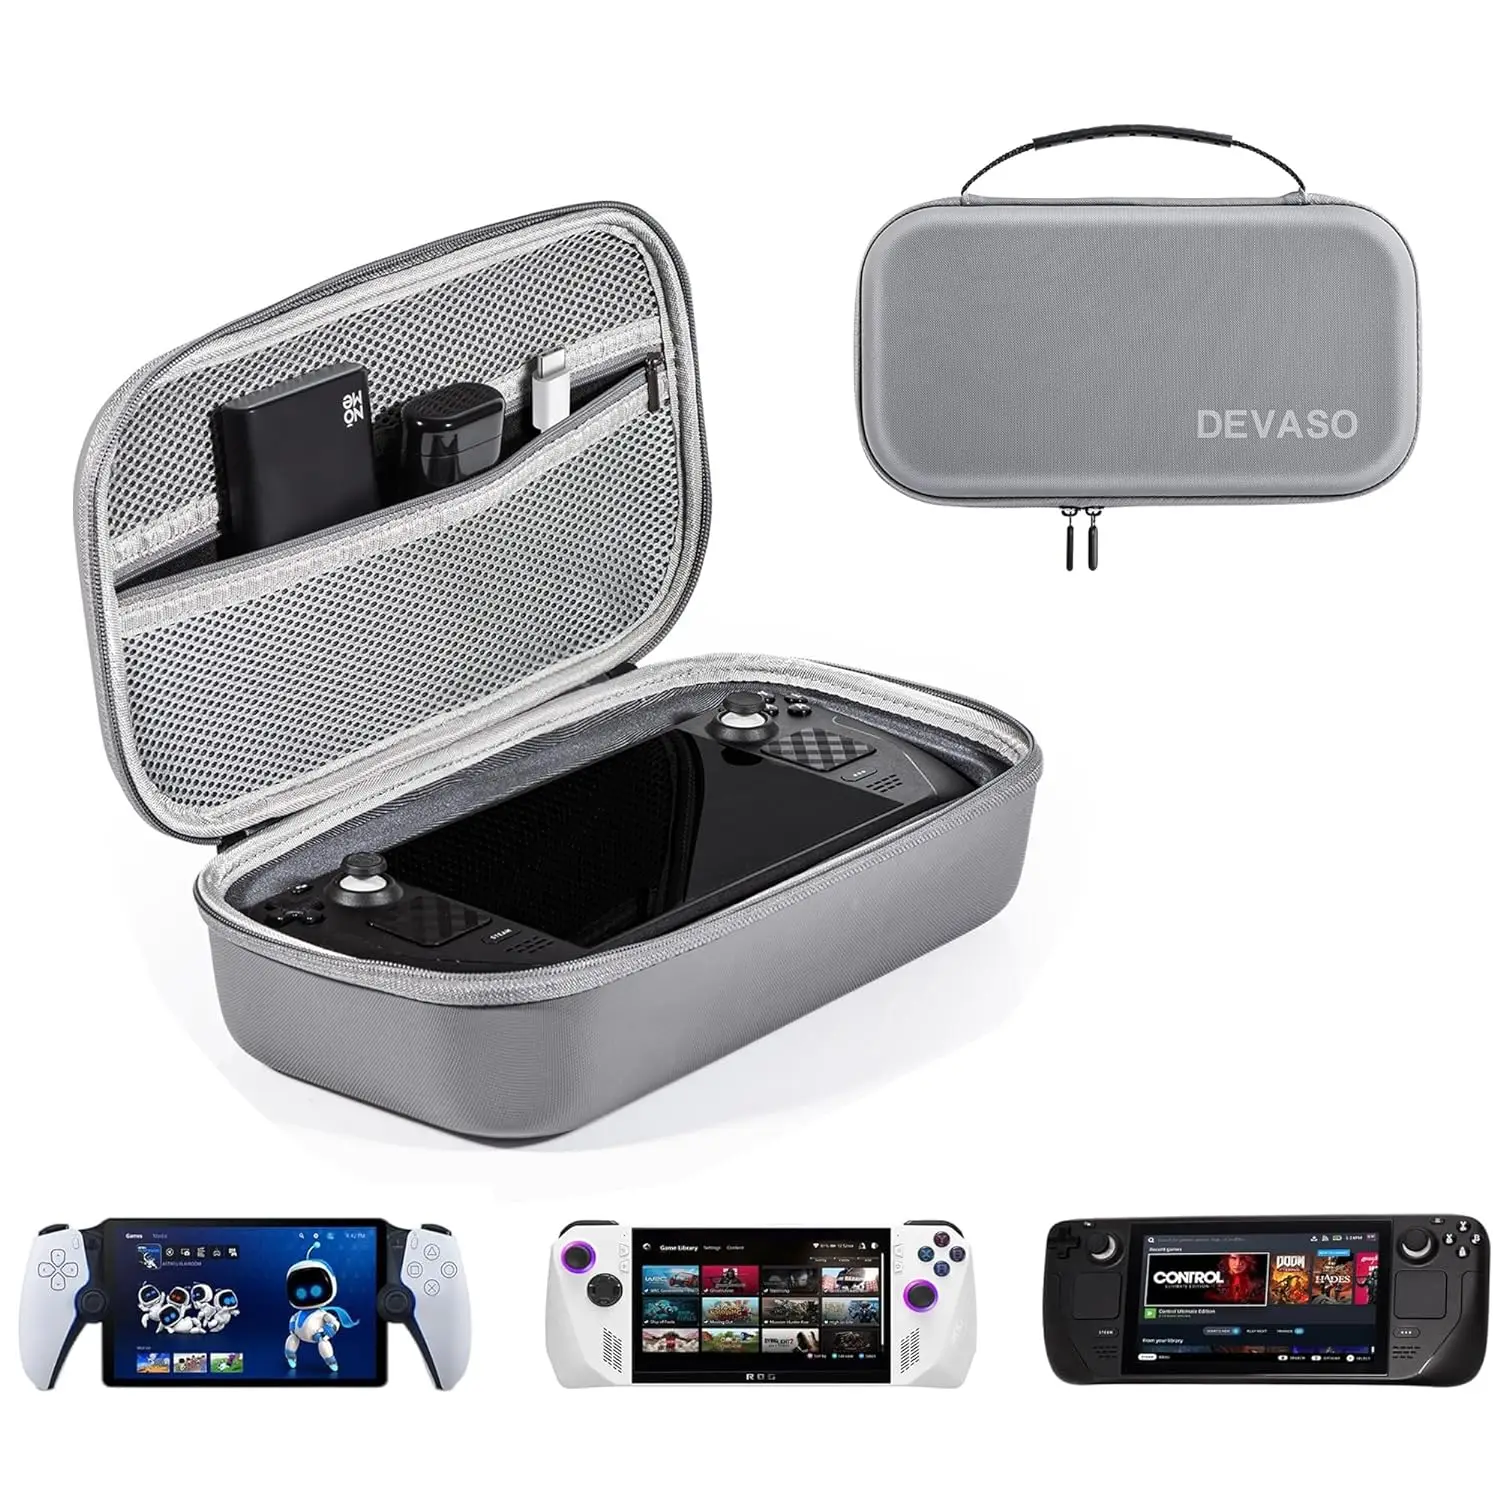 

Upgraded Carrying Case for Steam Deck OLED, Waterproof Portable Storage Shoulder Bag Travel Case for Steam Deck Console